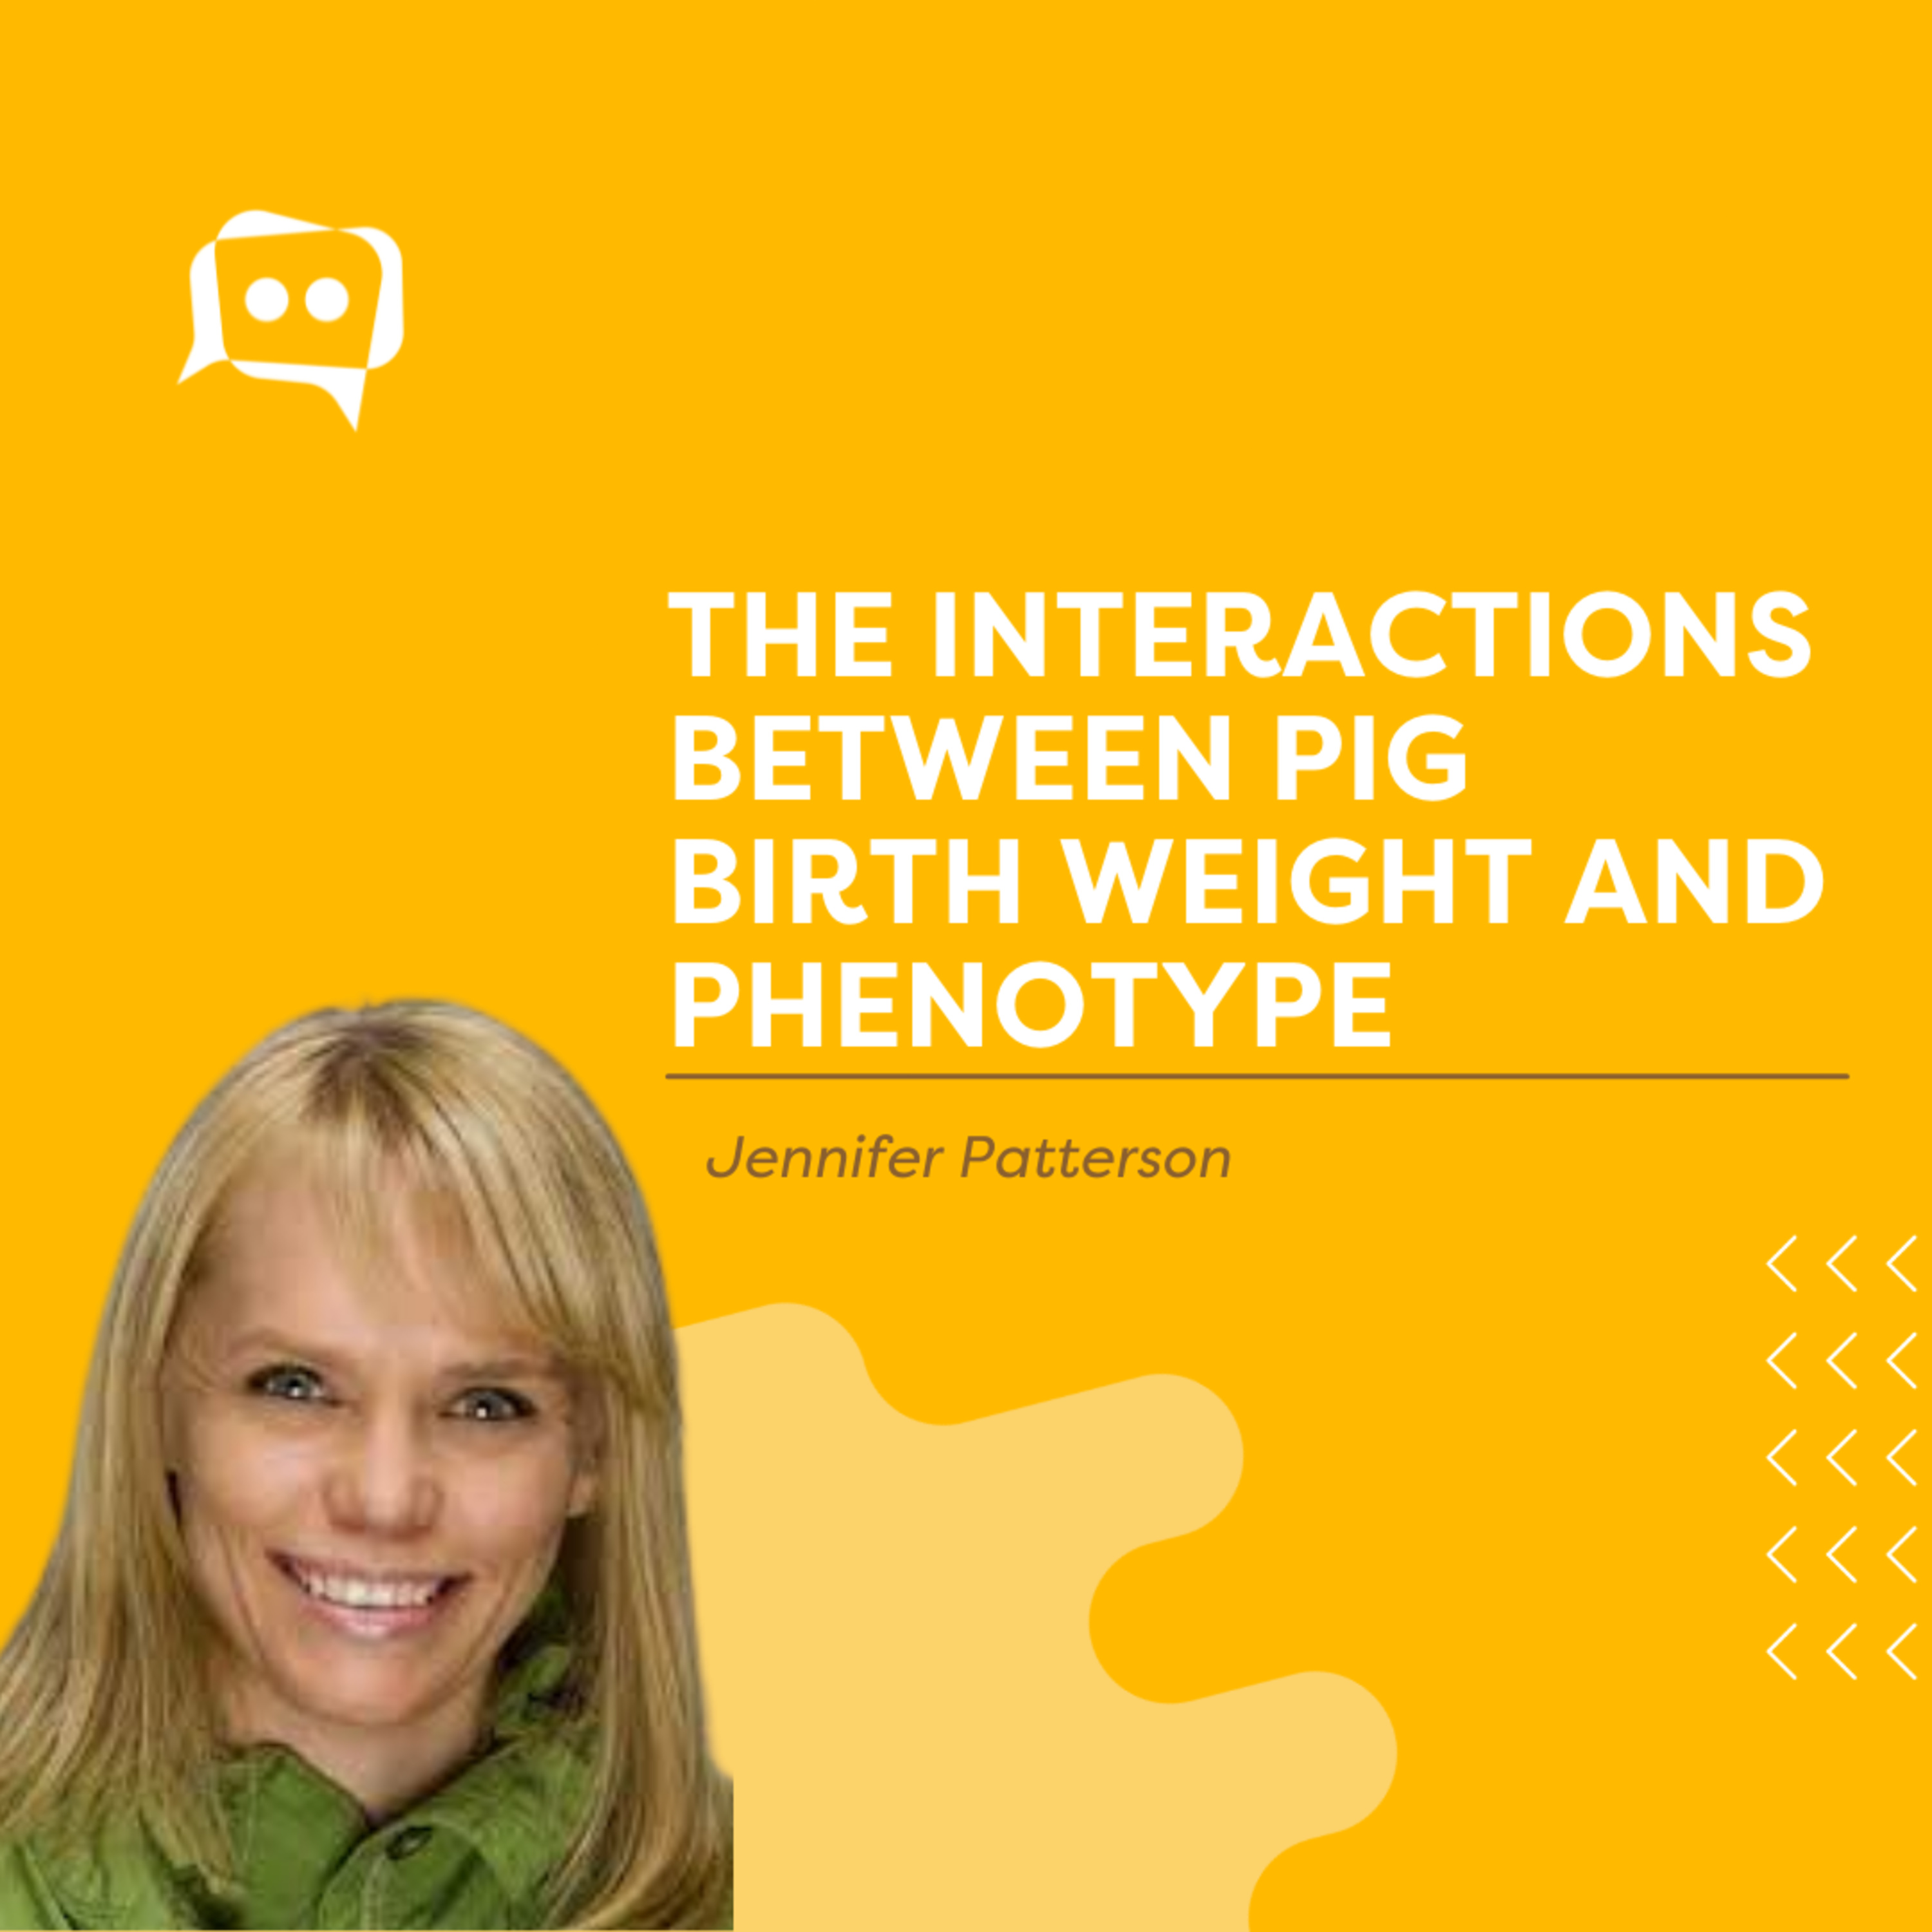 #SHORTS: The interactions between pig birth weight and phenotype, with Jennifer Patterson